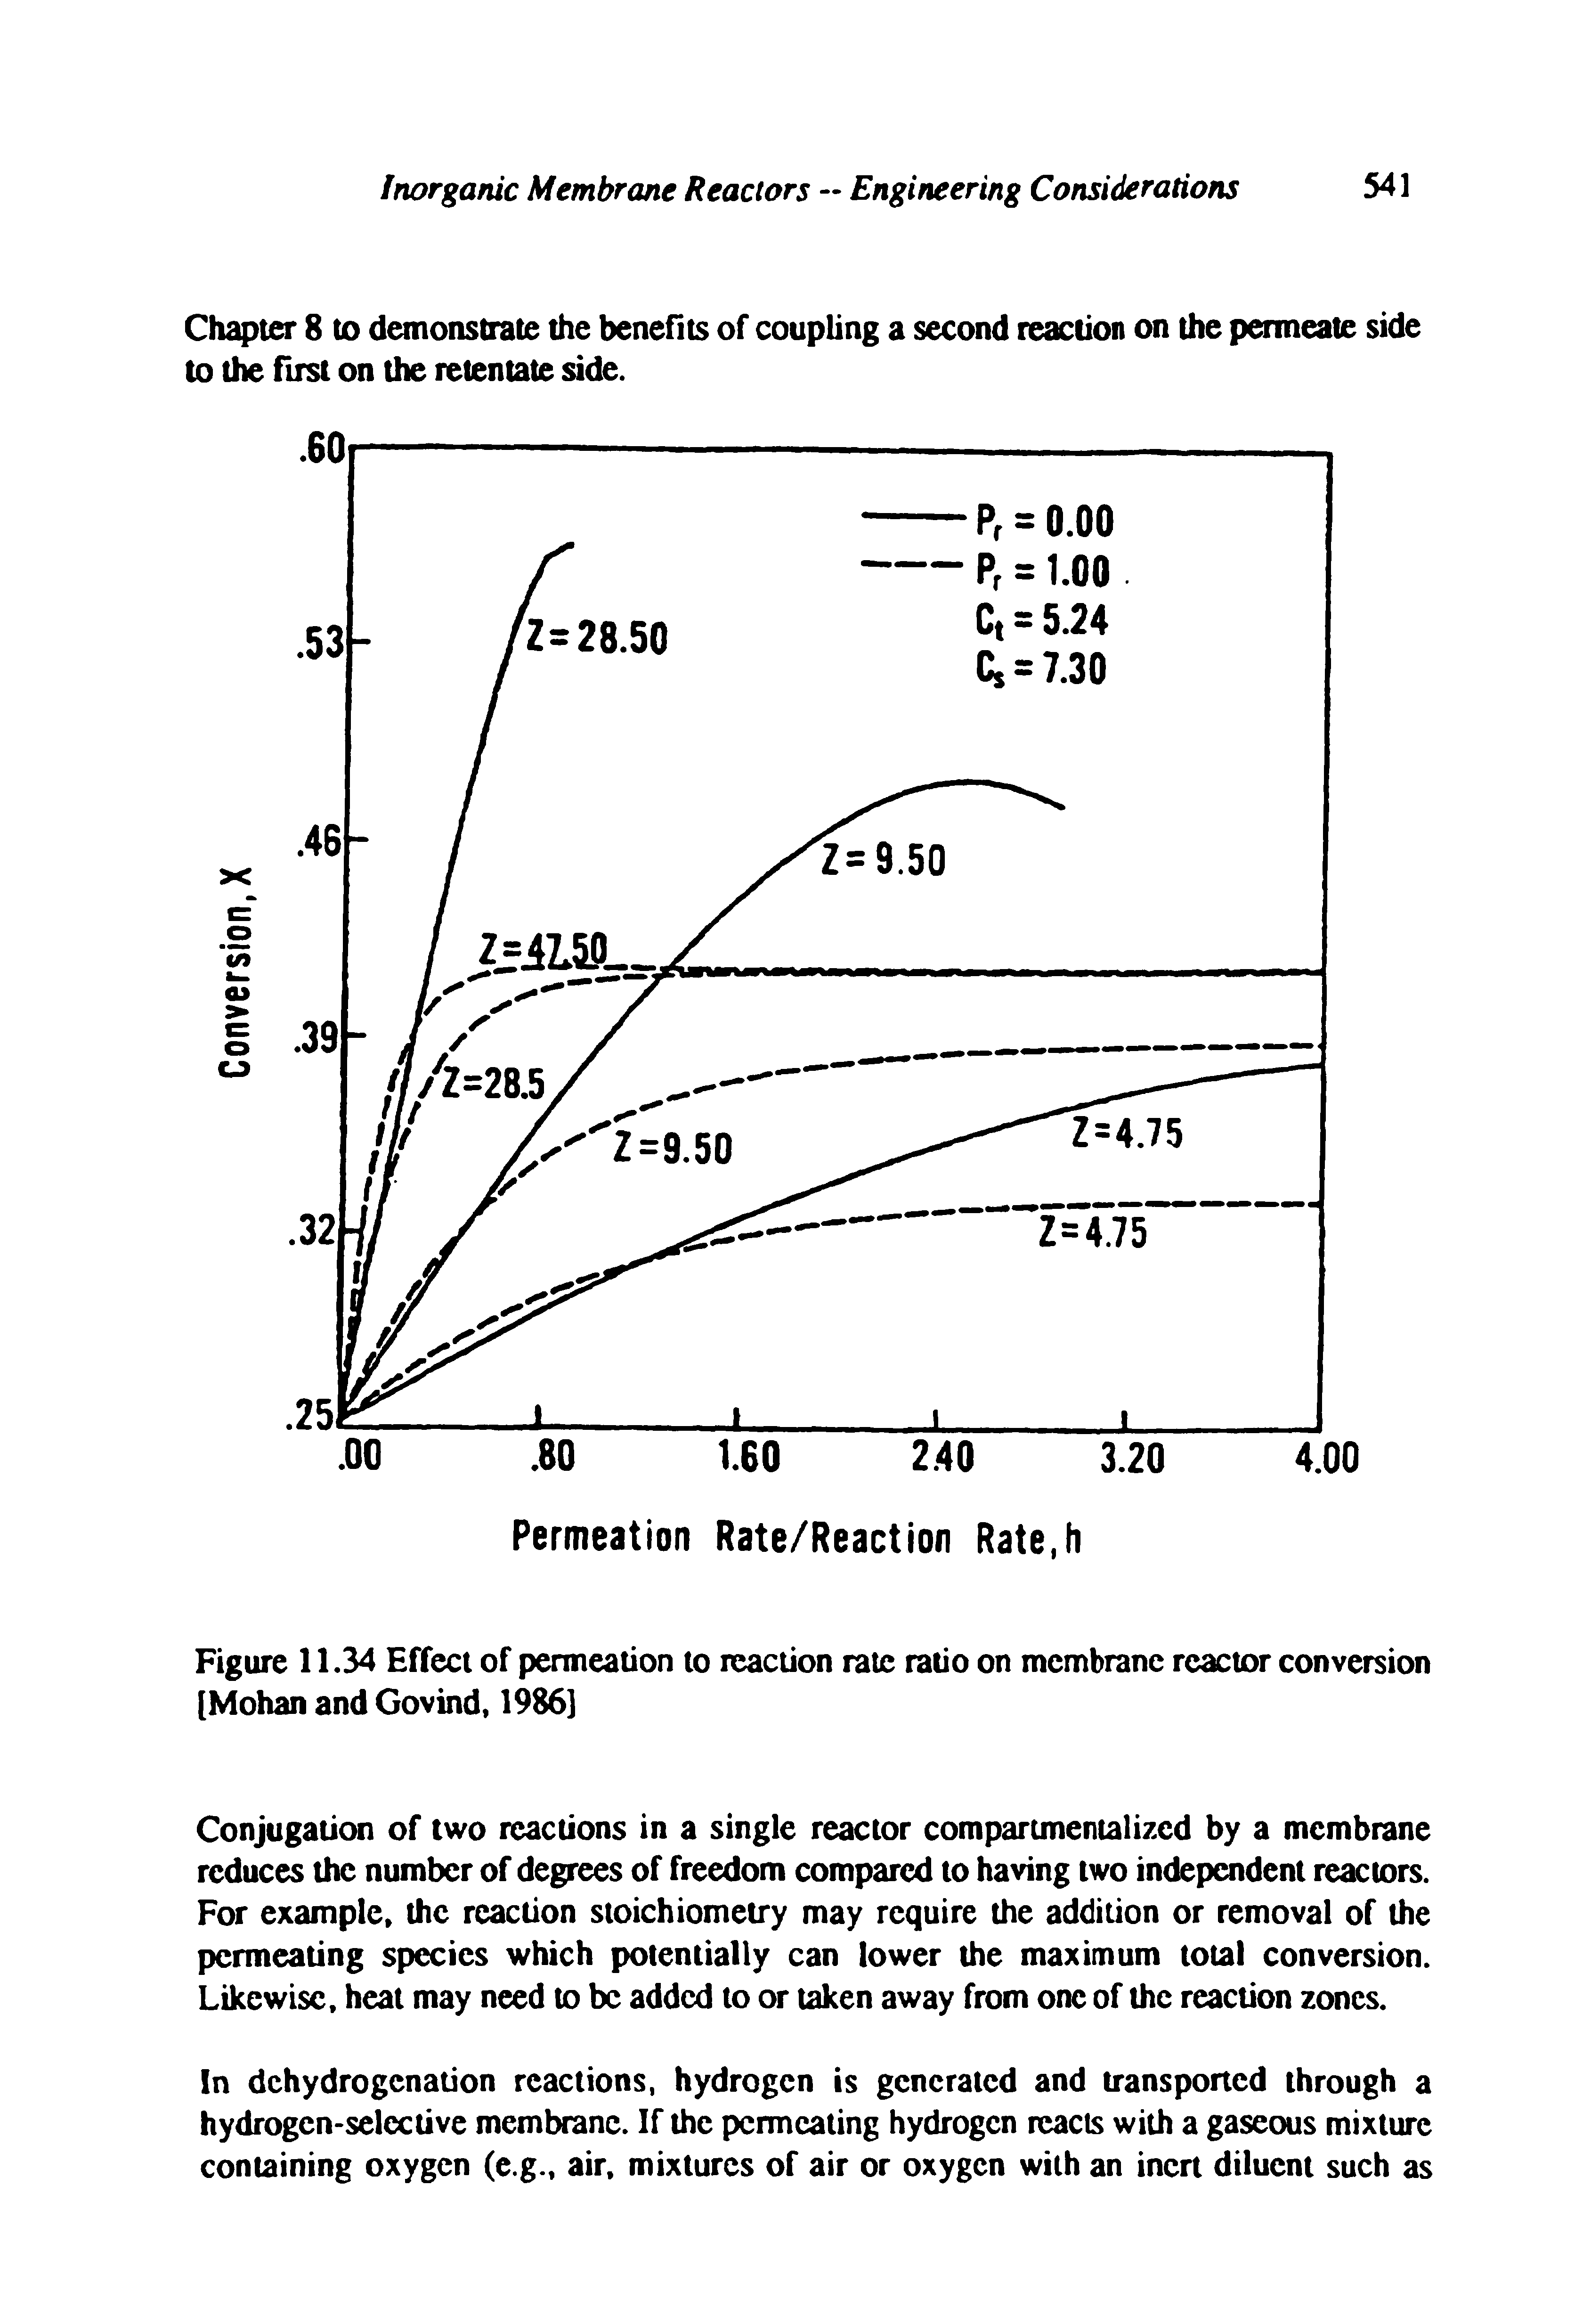 Figure 11.34 Effect of permeation to reaction rate ratio on membrane reactor conversion [Mohan and Govind, 1986]...